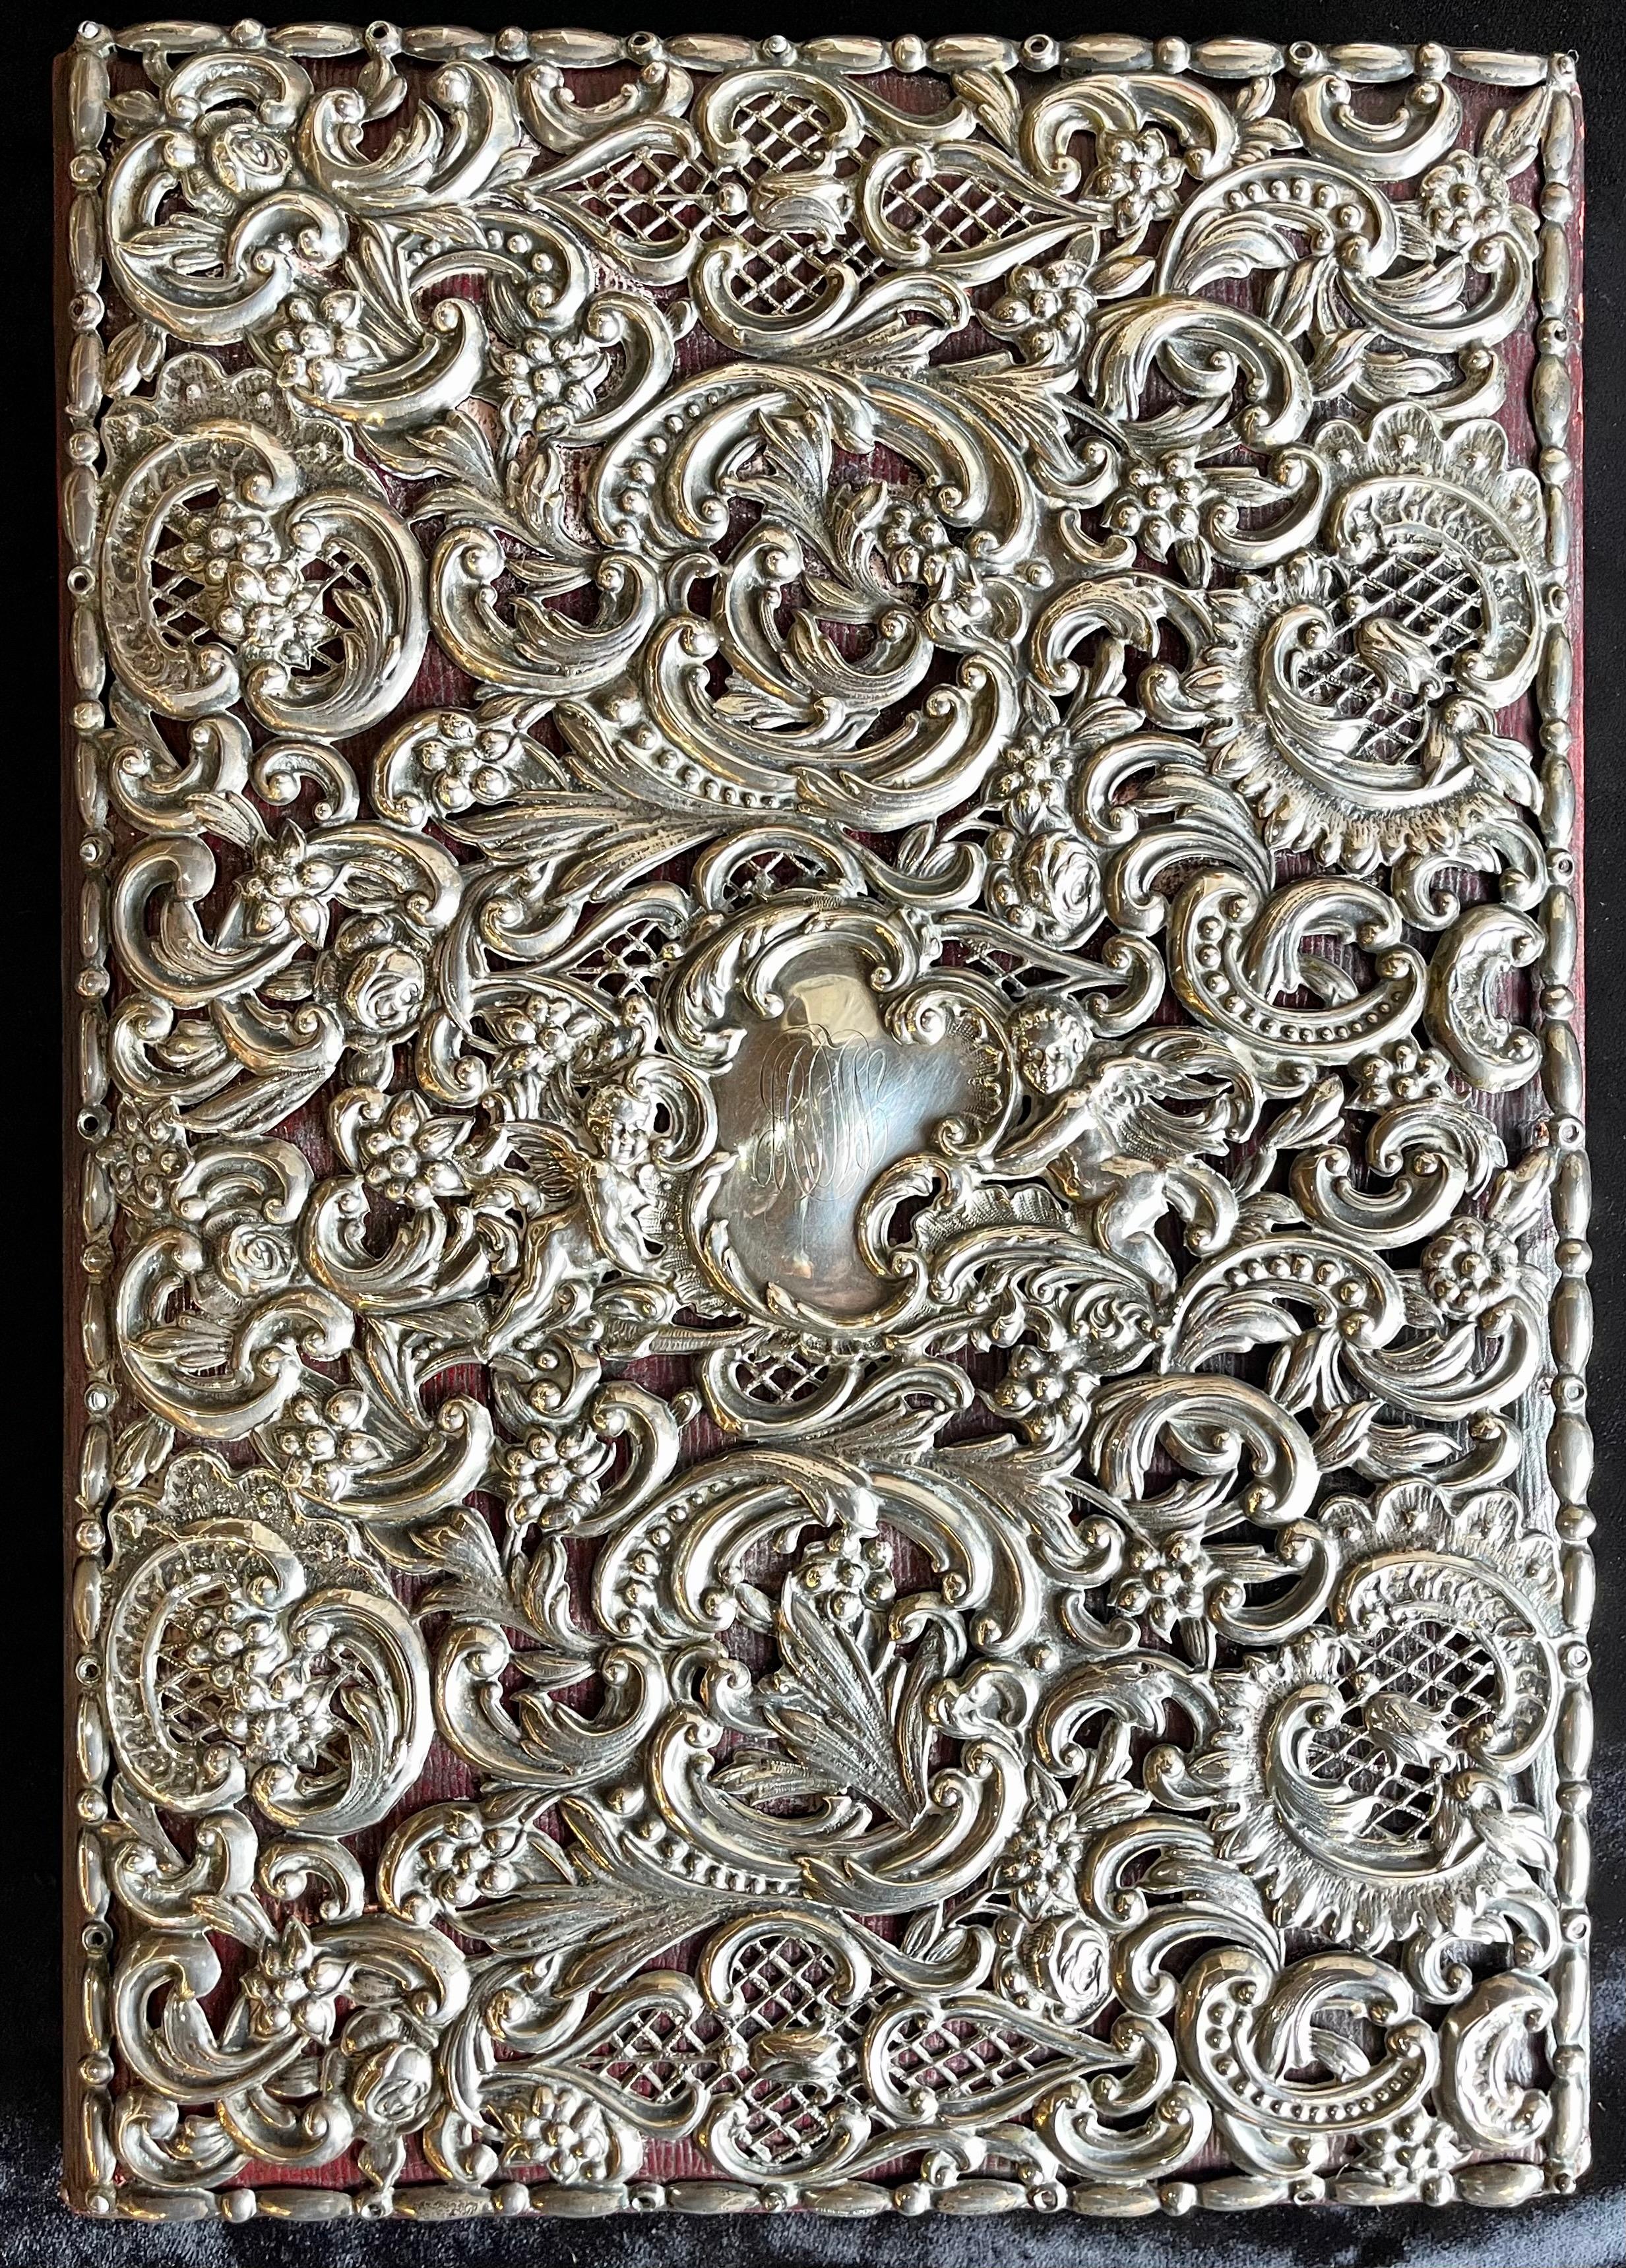 Ornate sterling silver book cover photo scrap album w red leather interior. Large and impressive. 
Marked Sterling 48


Meryl.